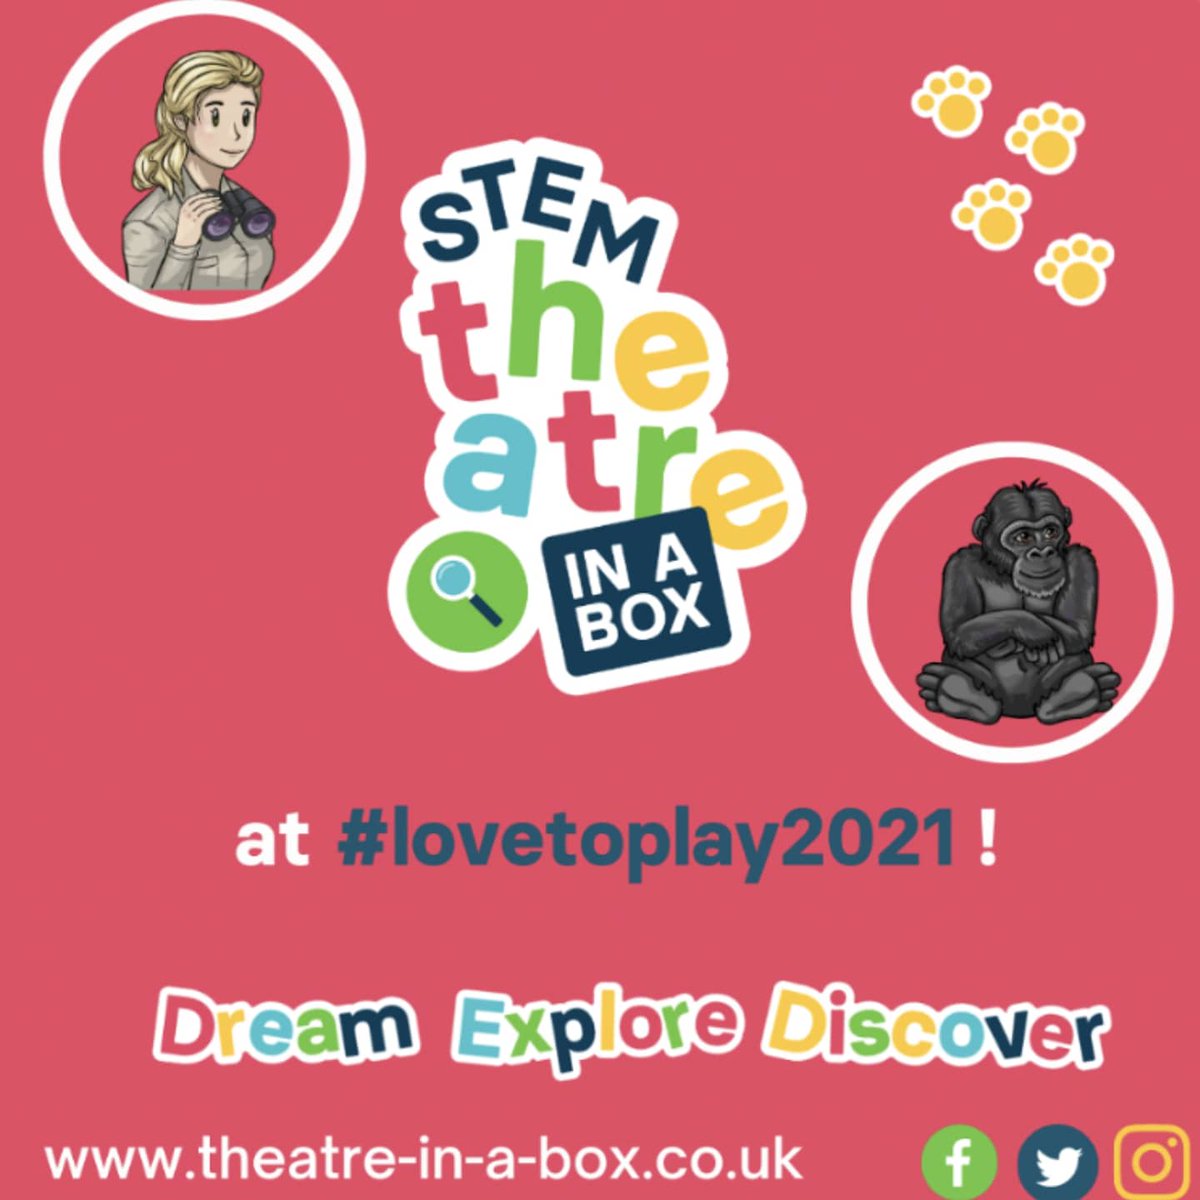 On Sun 11th, STEM Theatre In A Box  @arts_liberty will be teaching us about primatologist Dr Jane Goodall. Expect science experiments and a cheeky chimp! This one is aimed at primary age kids, so if you’ve got littluns they’ll love it. Register: https://www.lovetoplay.fun/event/stem-theatre-in-a-box/